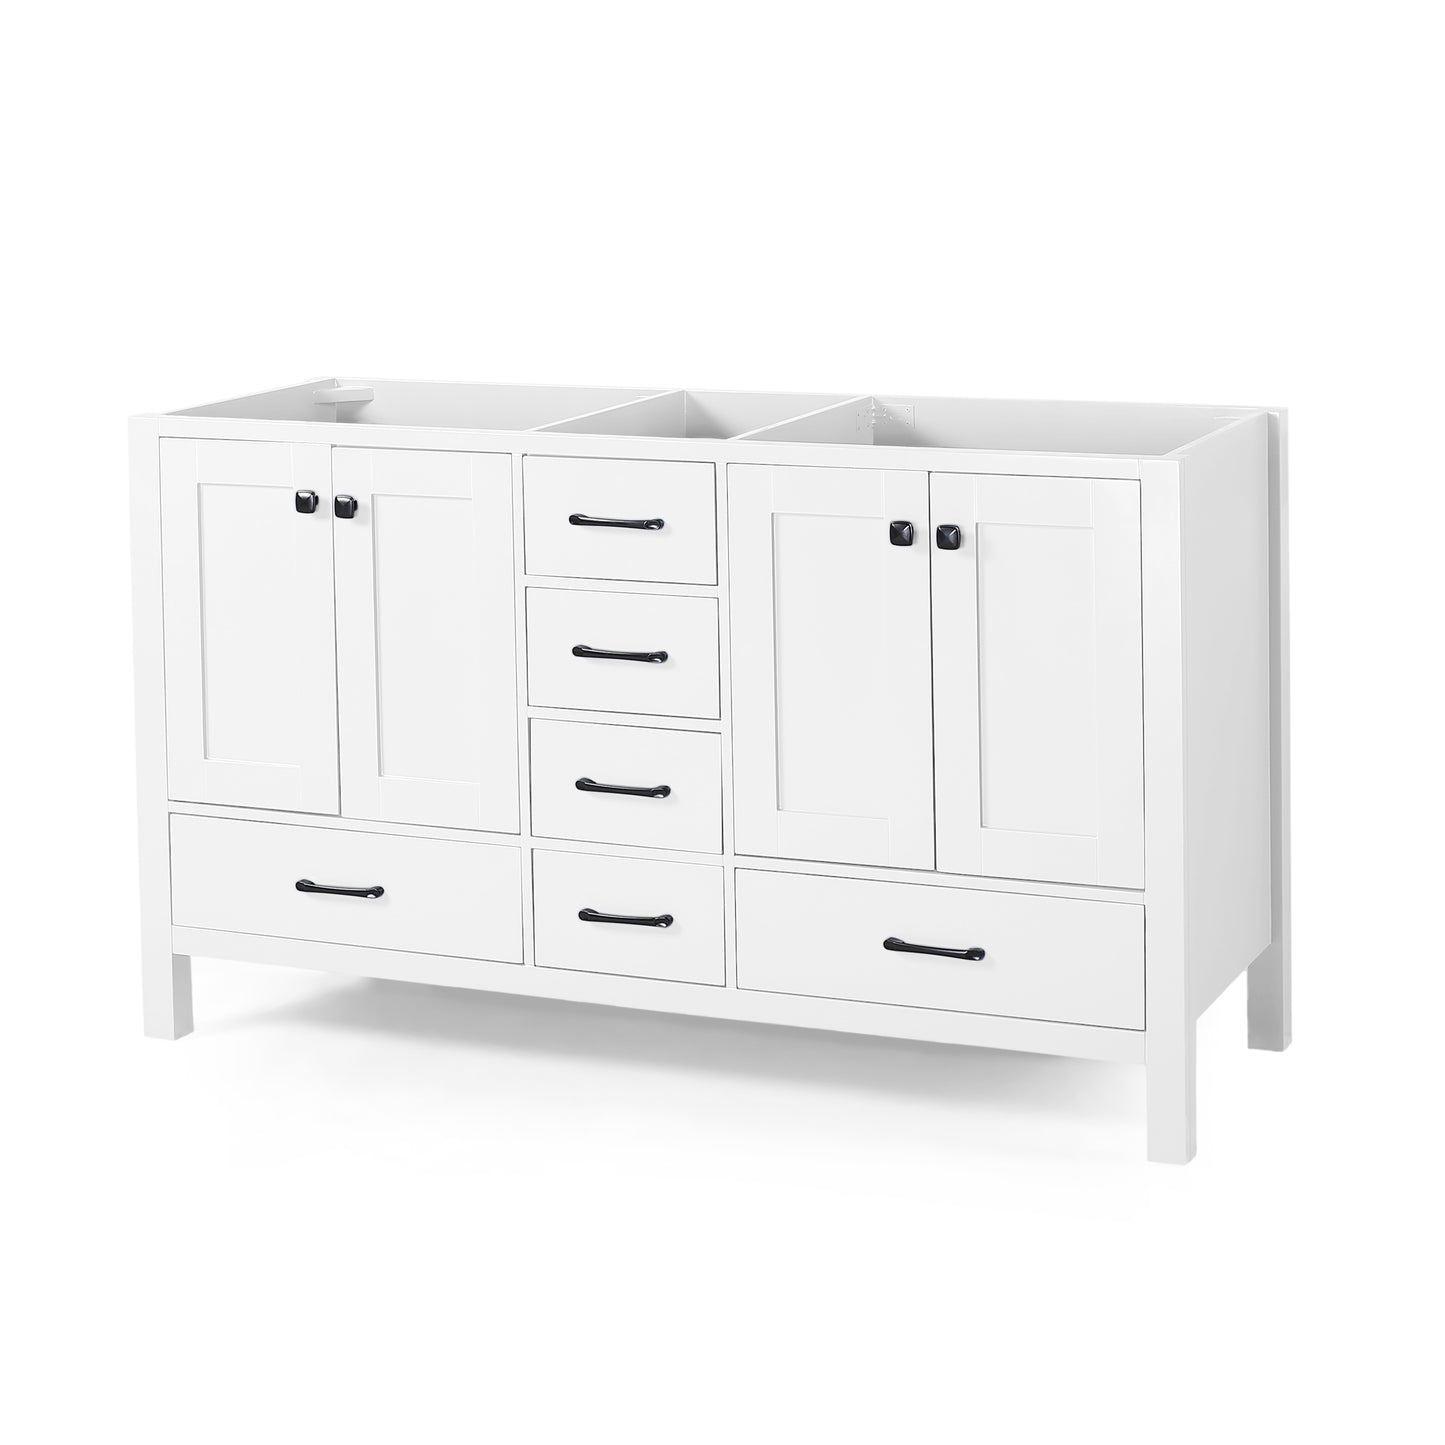 Laranne Contemporary 72" Wood Bathroom Vanity (Counter Top Not Included)